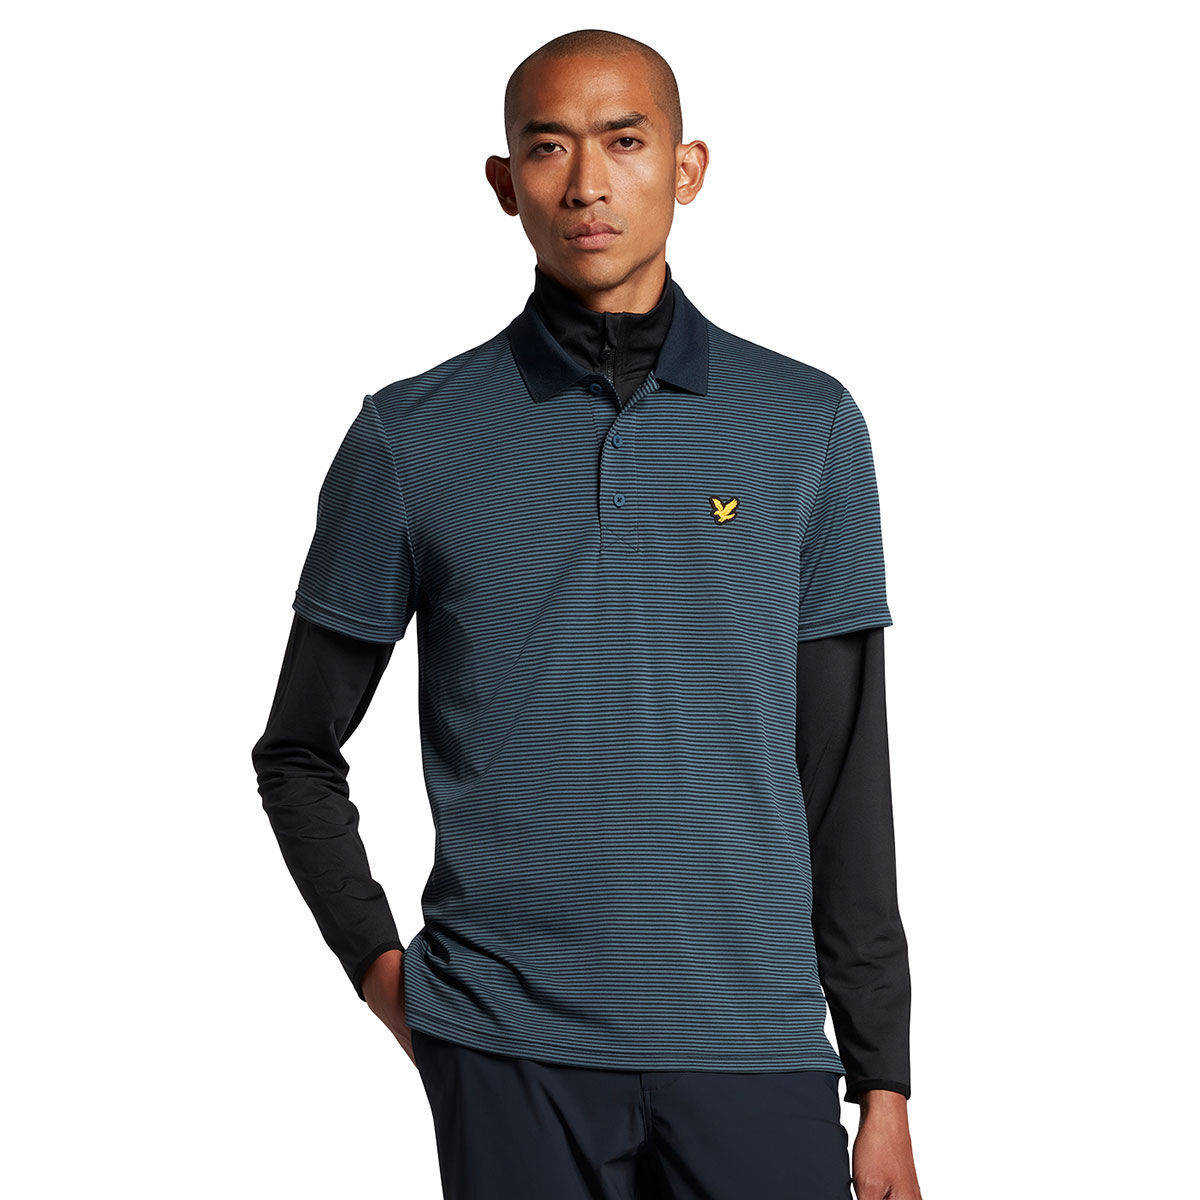 Lyle & Scott Men’s Blue Comfortable Embroidered Microstripe Golf Polo Shirt, Size: Small | American Golf